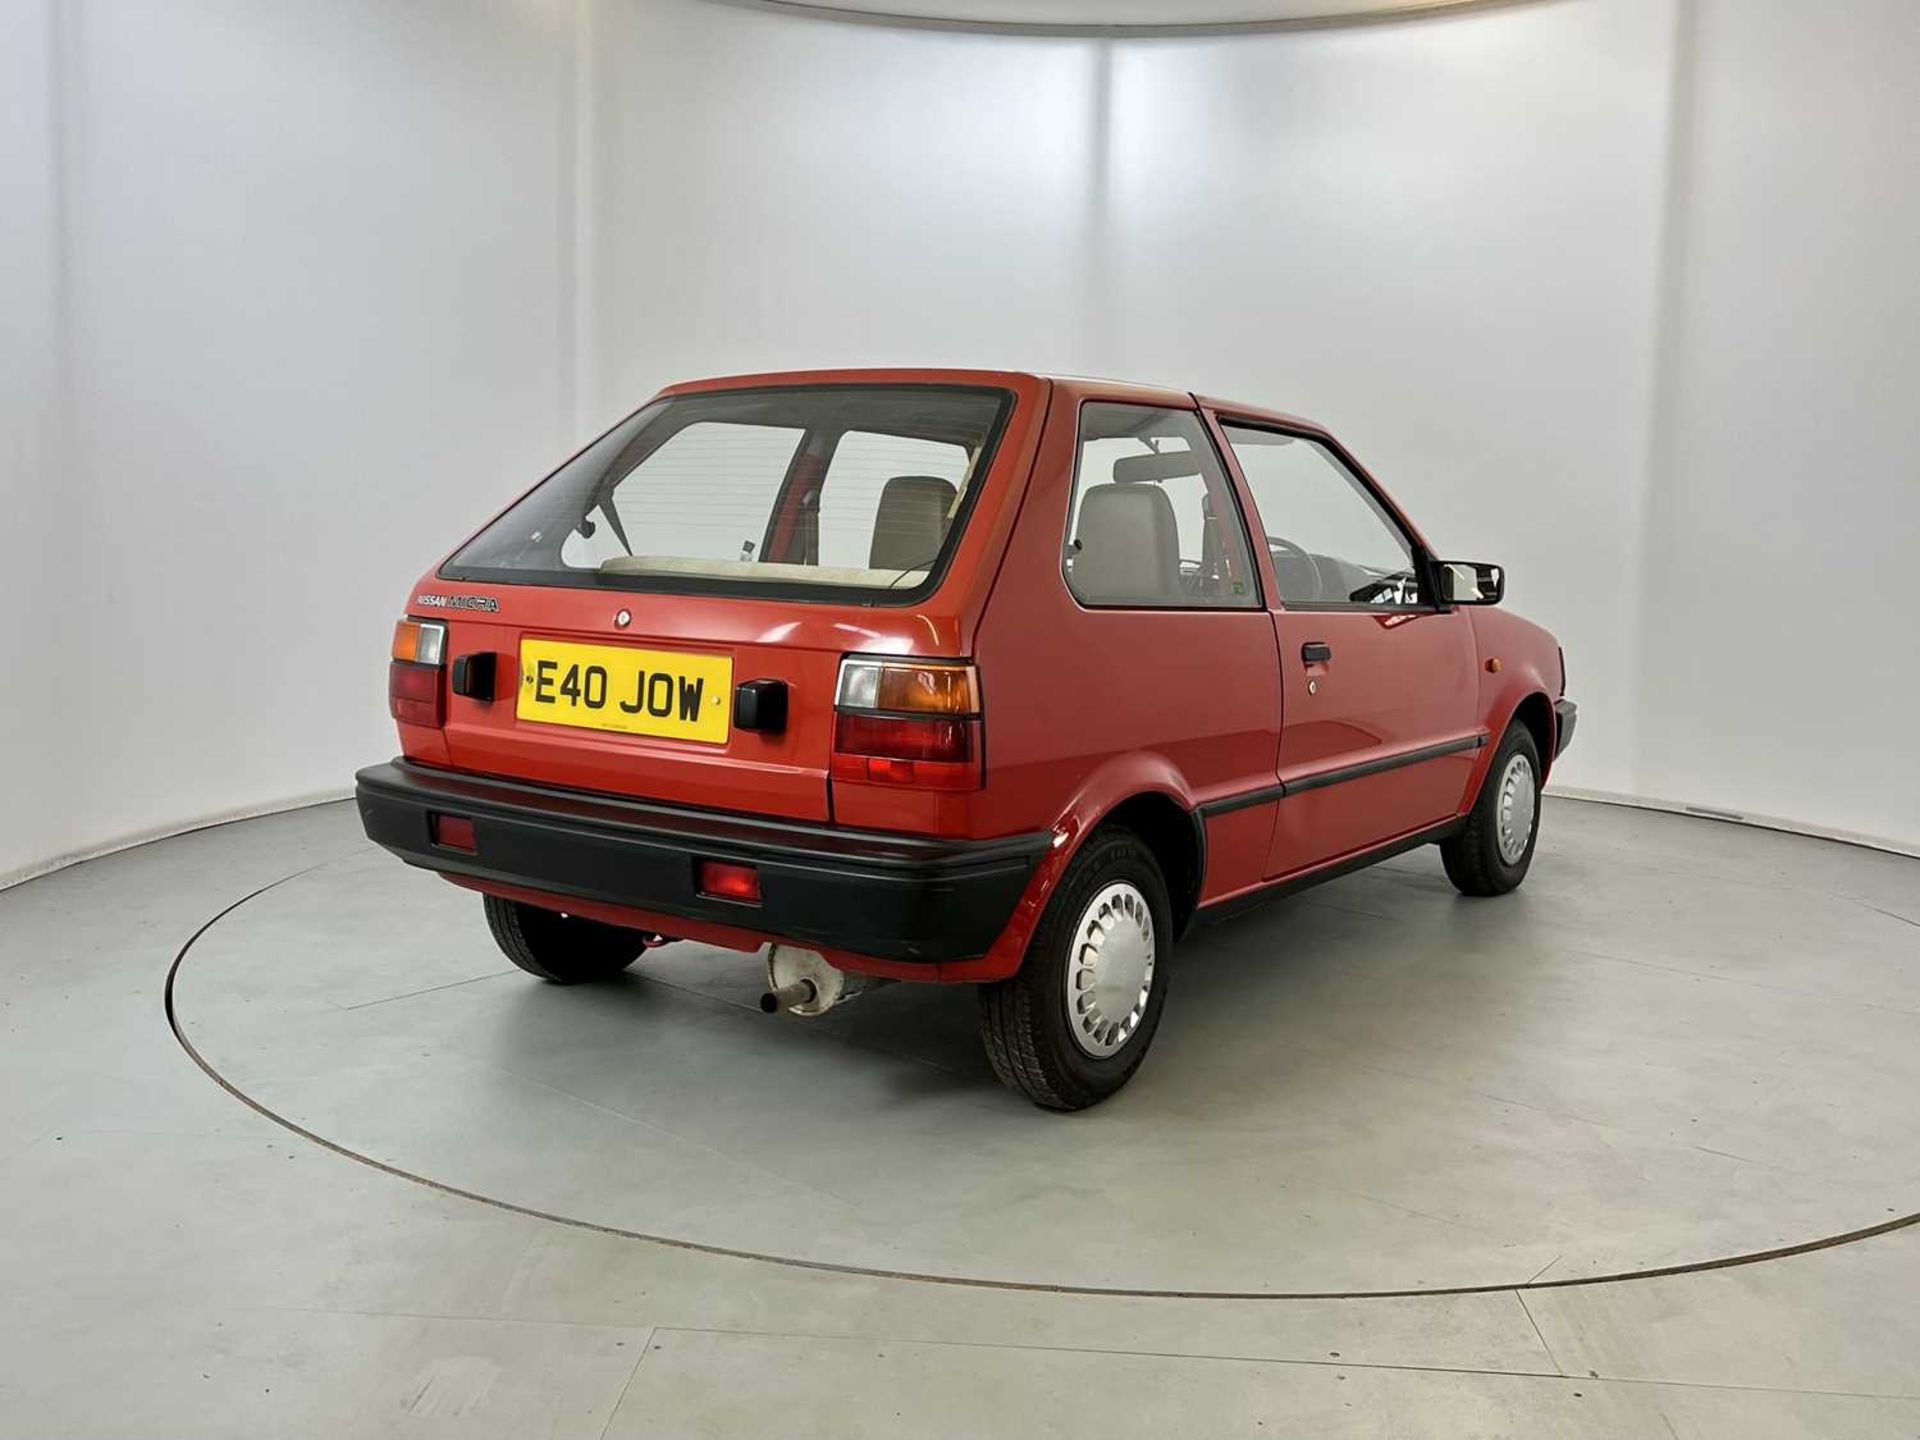 1987 Nissan Micra - Image 9 of 29